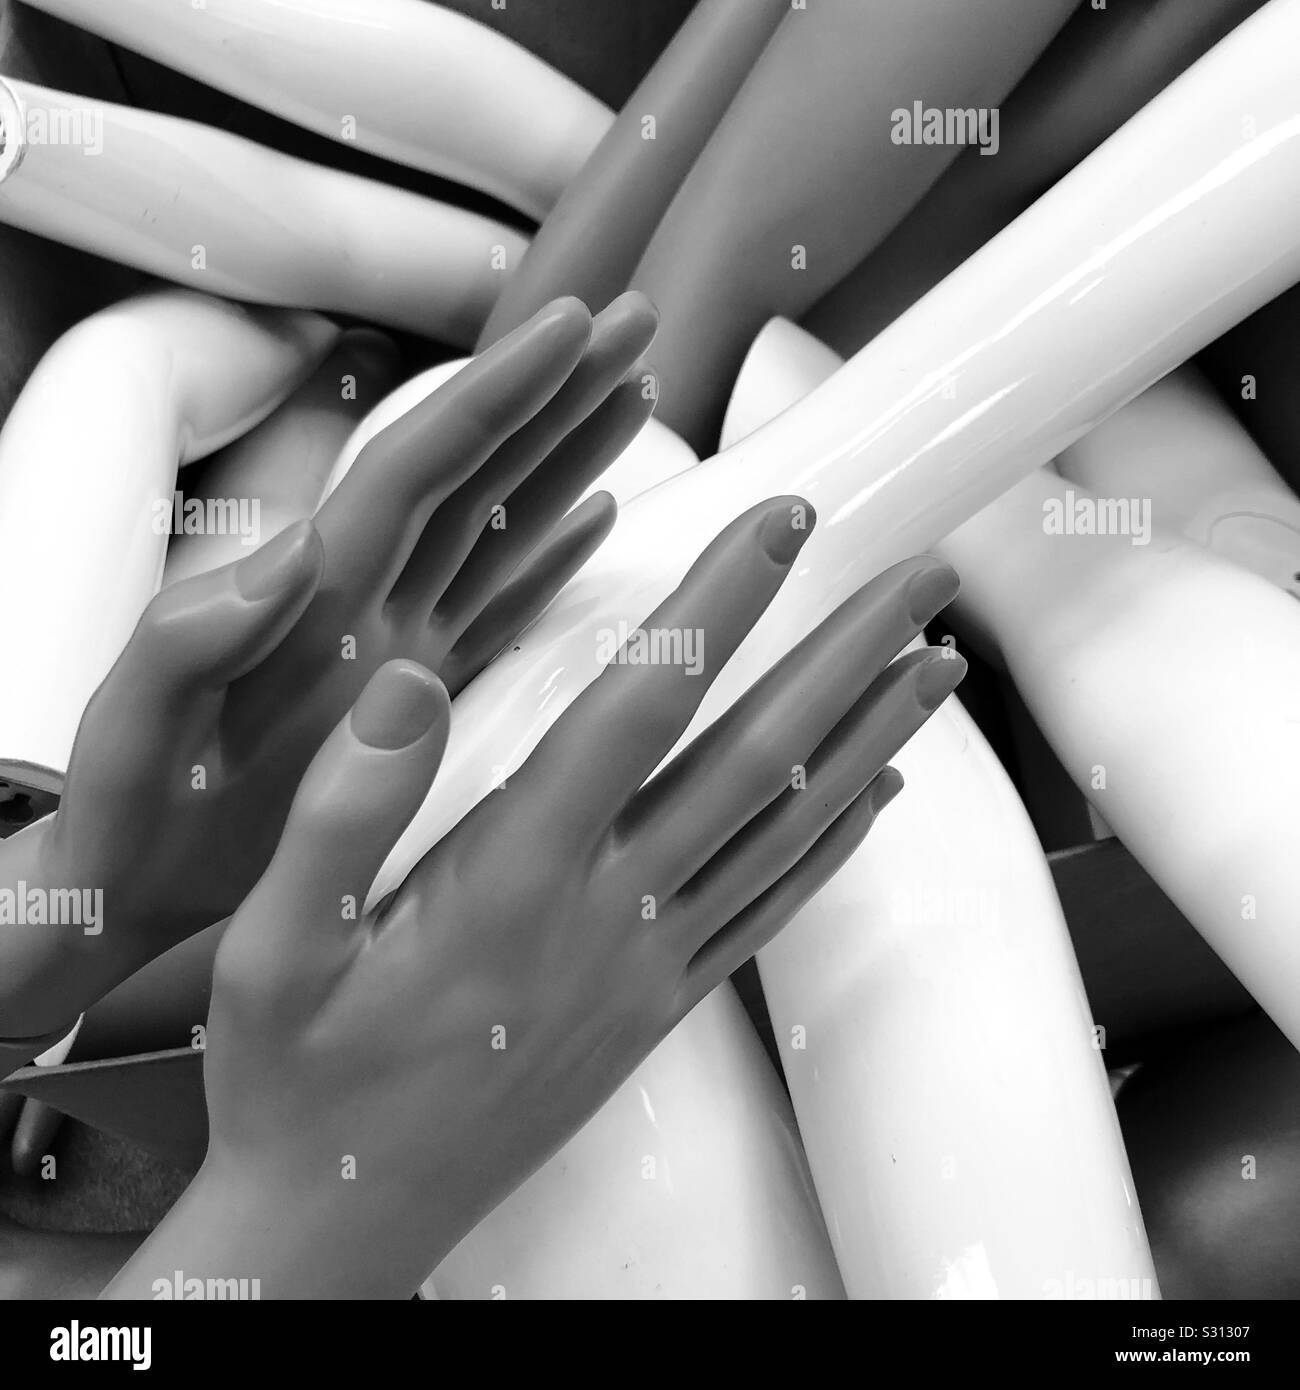 The hands of a mannequin amidst a pile of mannequin arms and hands in black and white Stock Photo